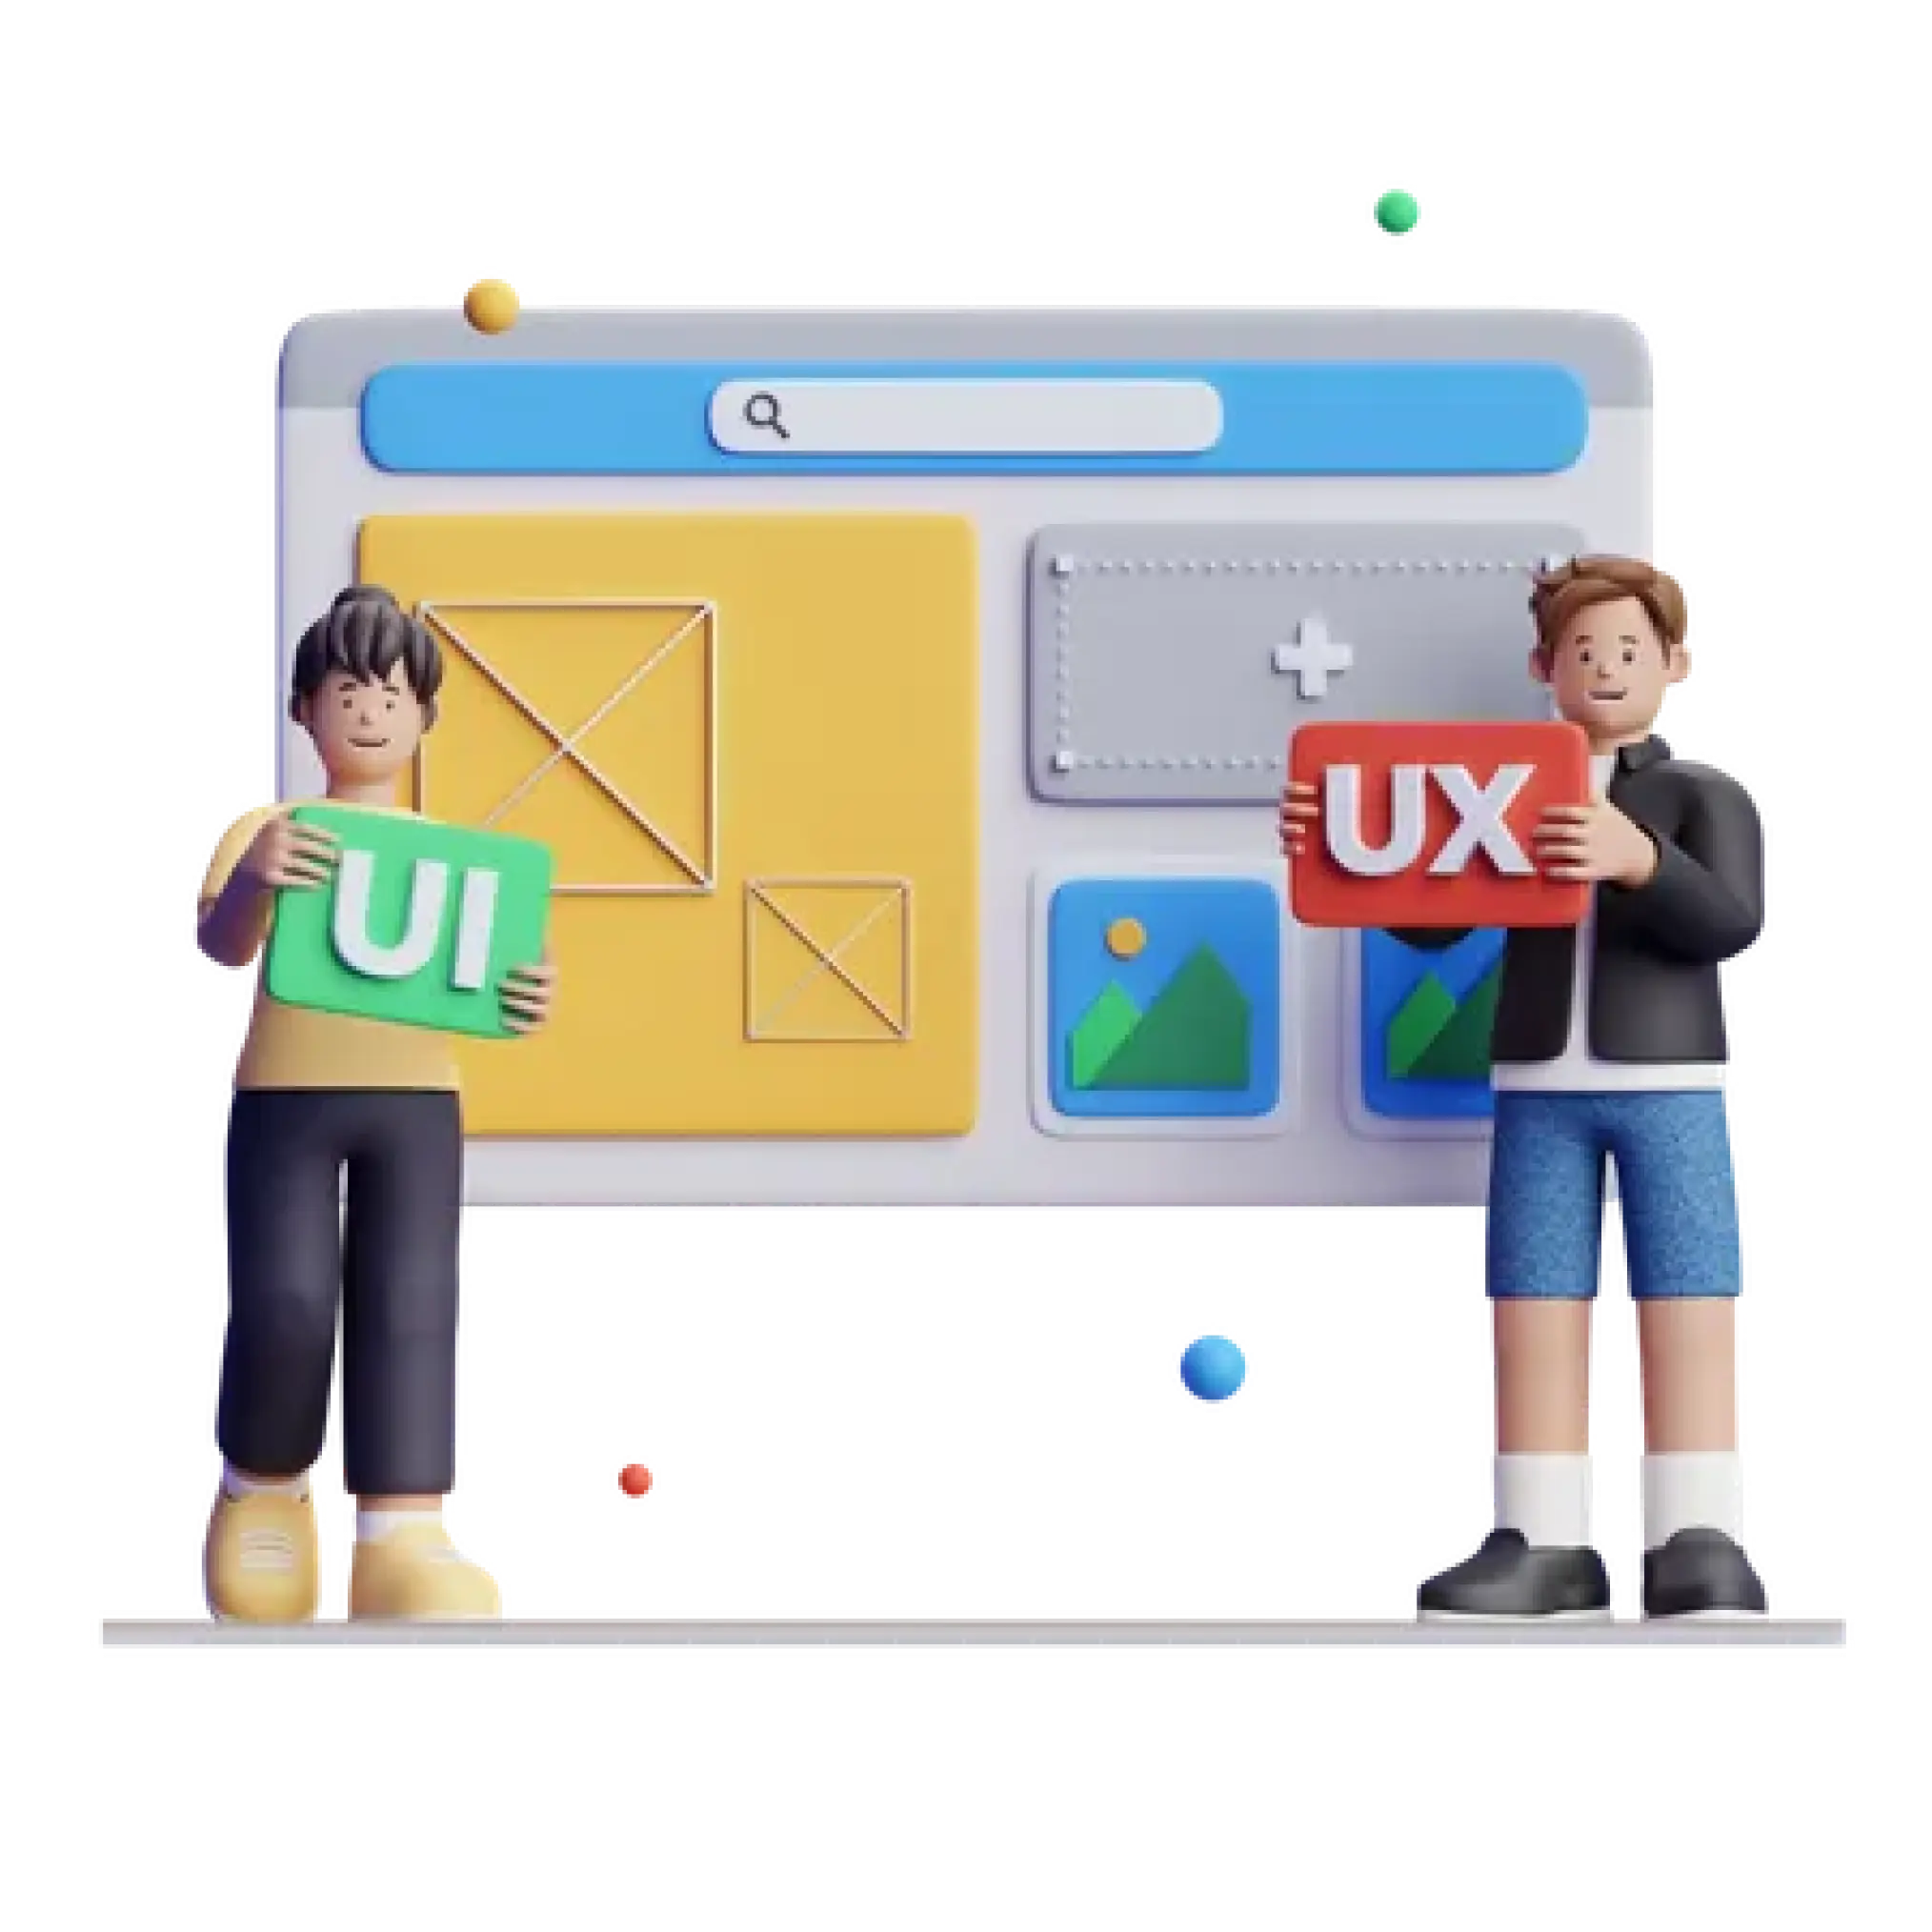 The term UX & UI are shown by two people as a way to show their skill in user interface & design.